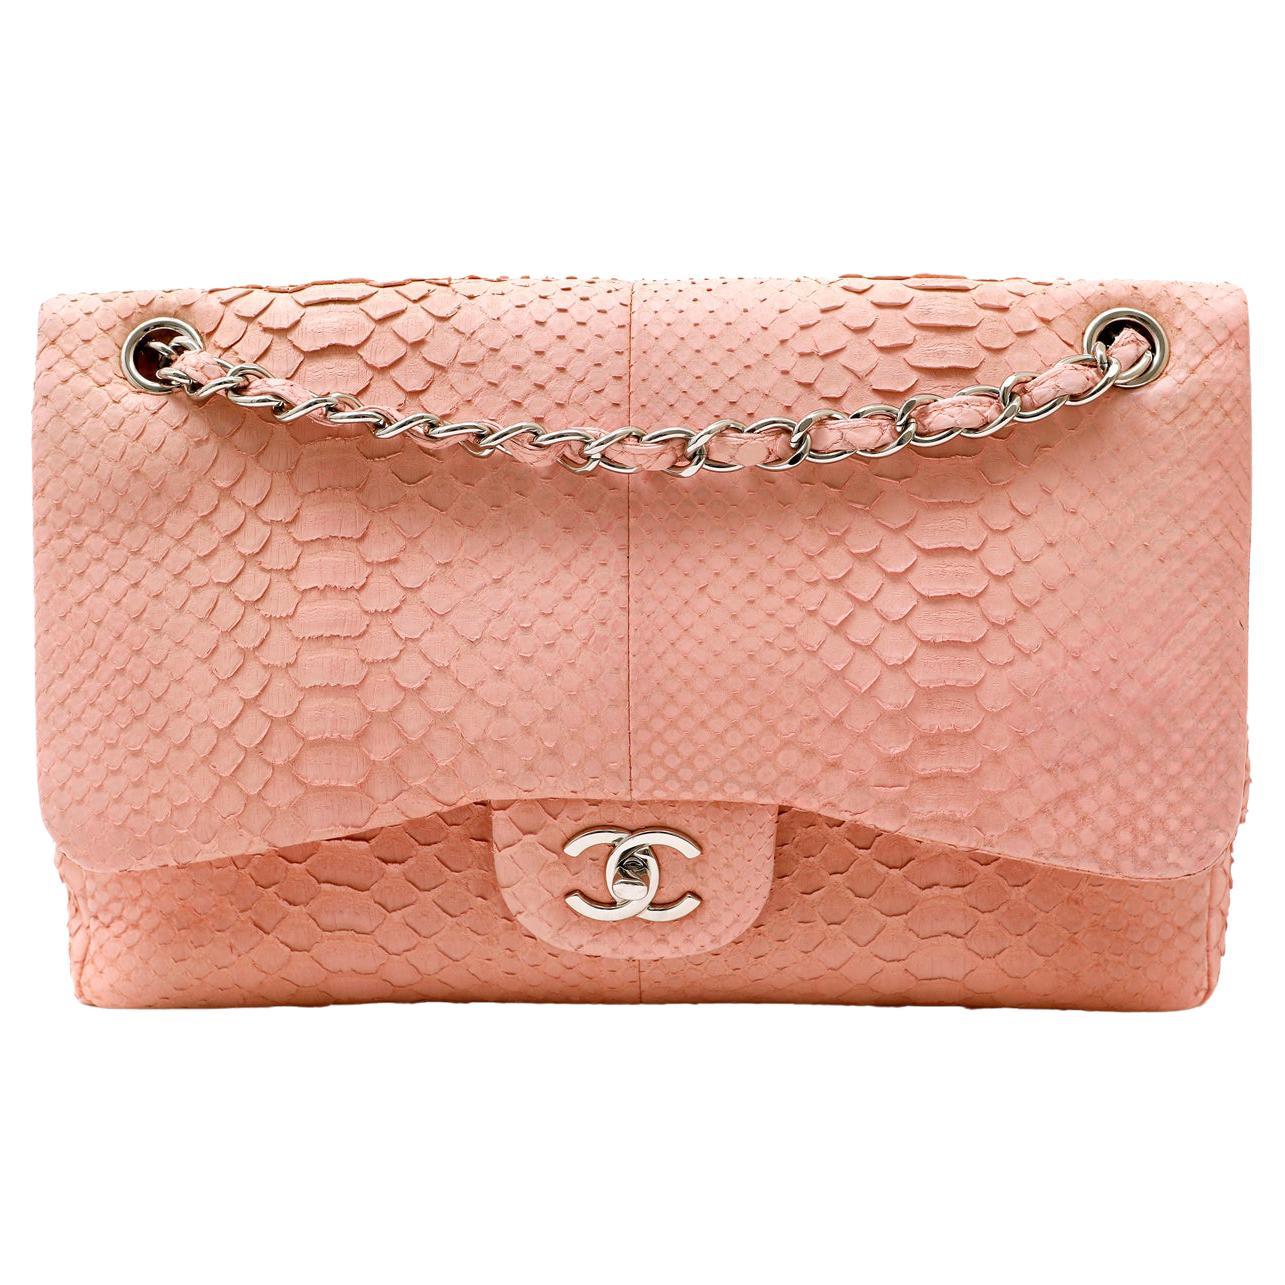 Replica Chanel Python Small 20cm Classic Flap Bag Dusty Pink